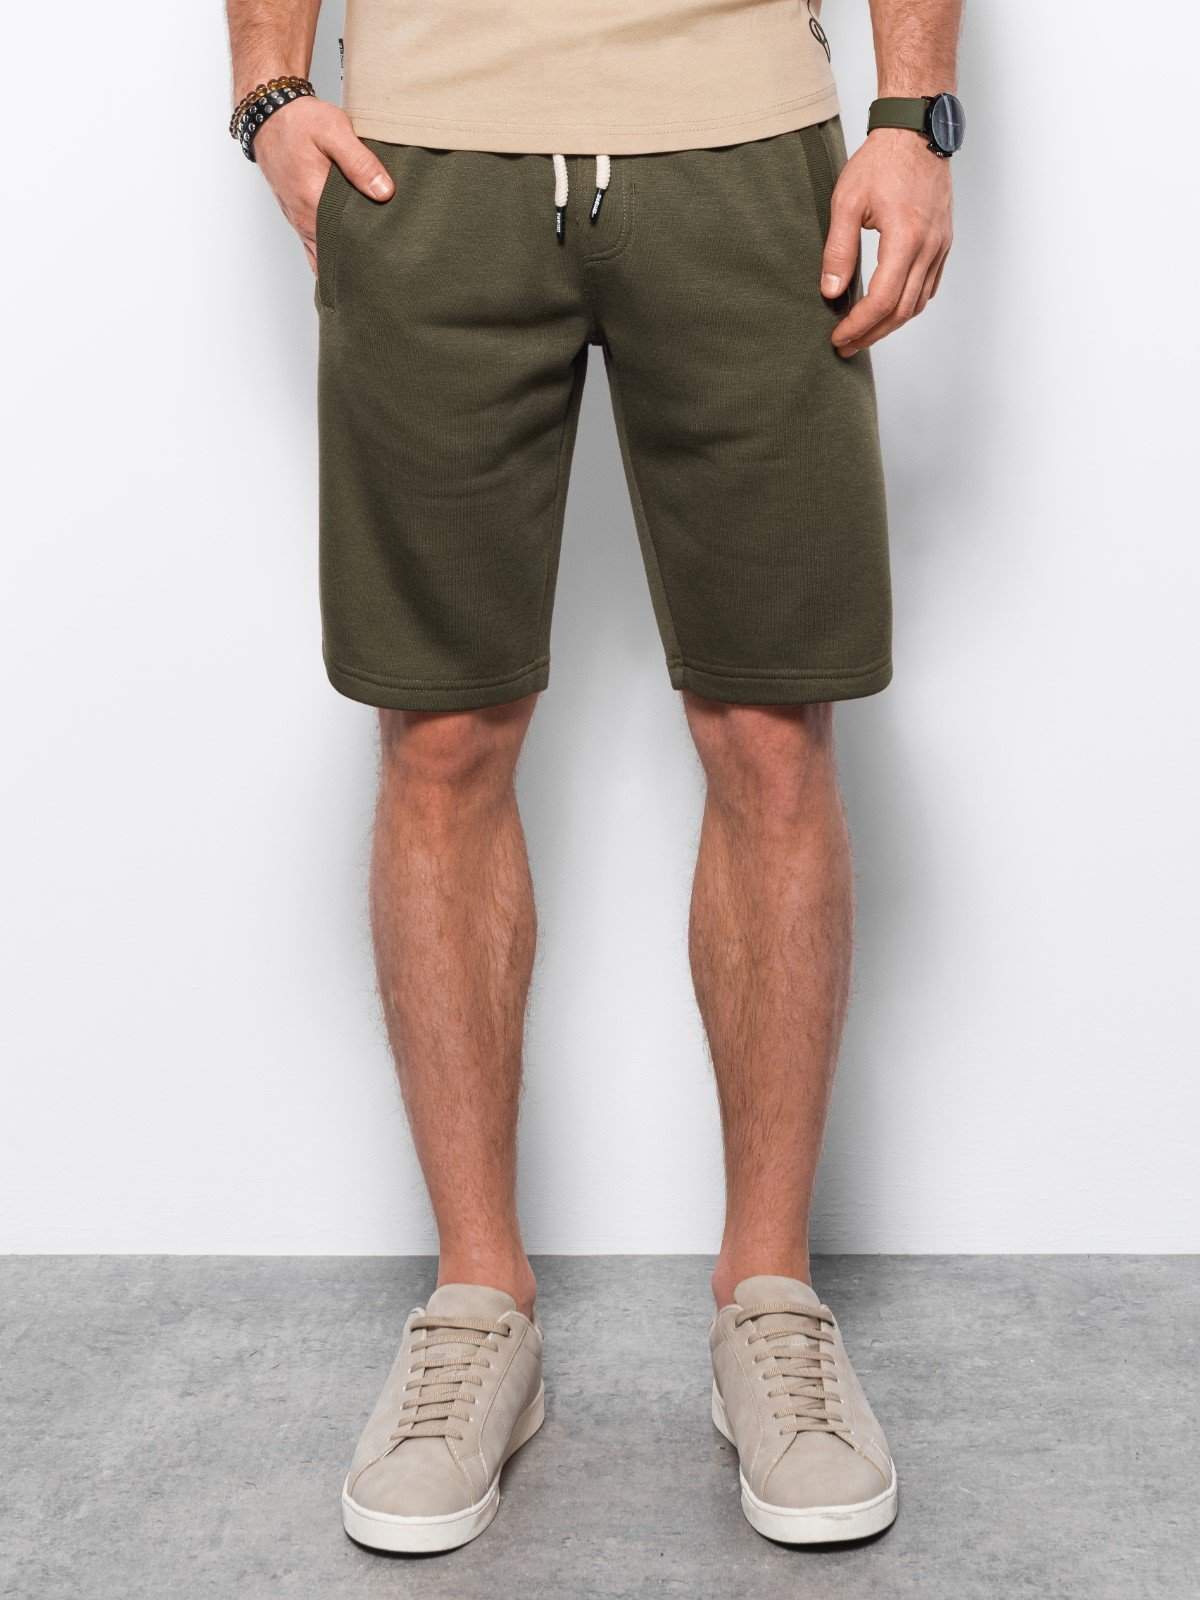 Ombre Men's short shorts with pockets